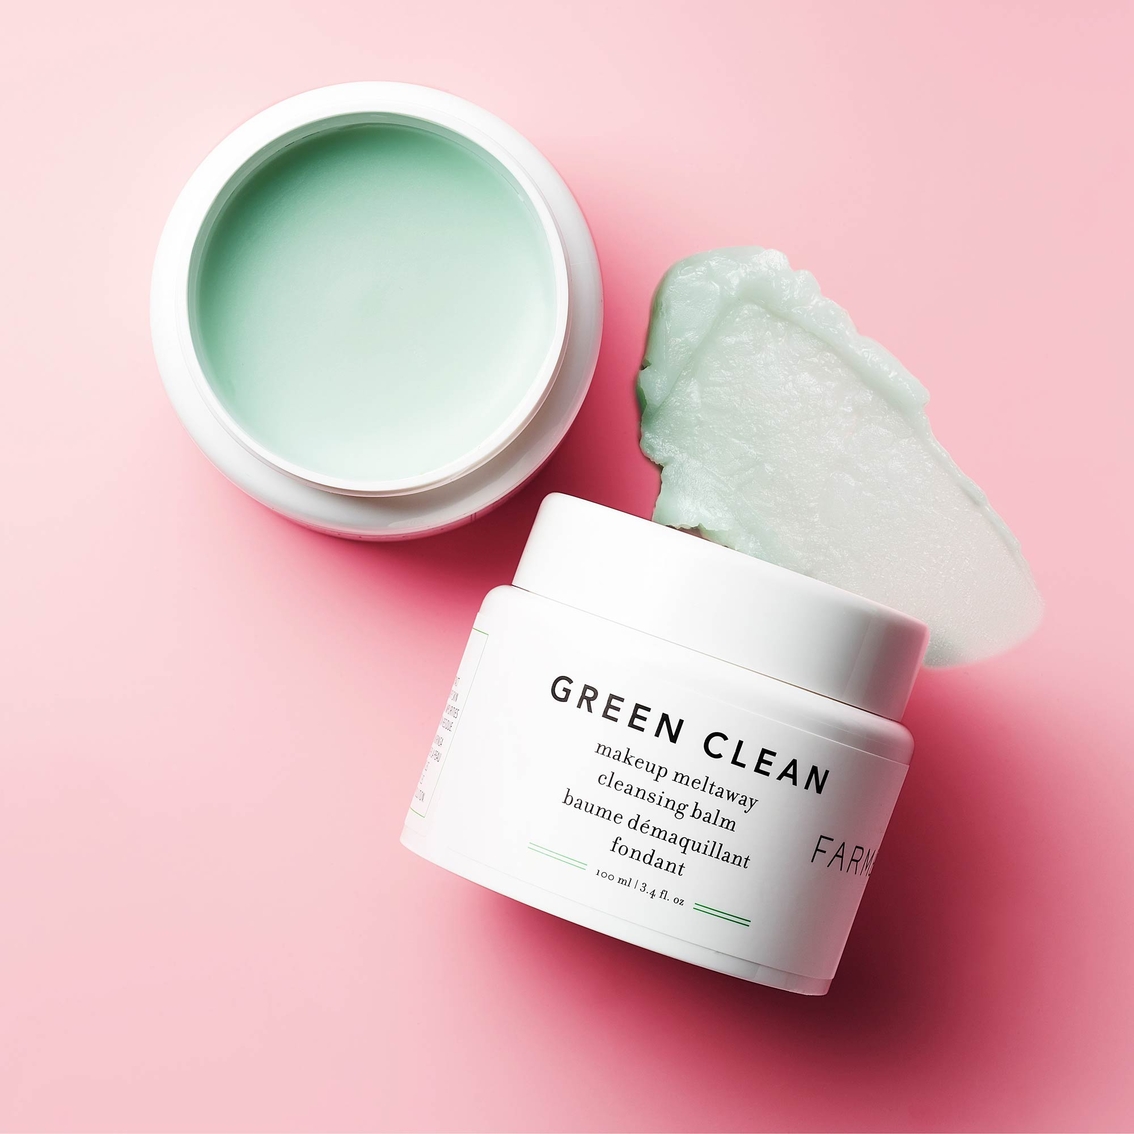 Farmacy Green Clean Makeup Meltaway Cleansing Balm - Image 3 of 5